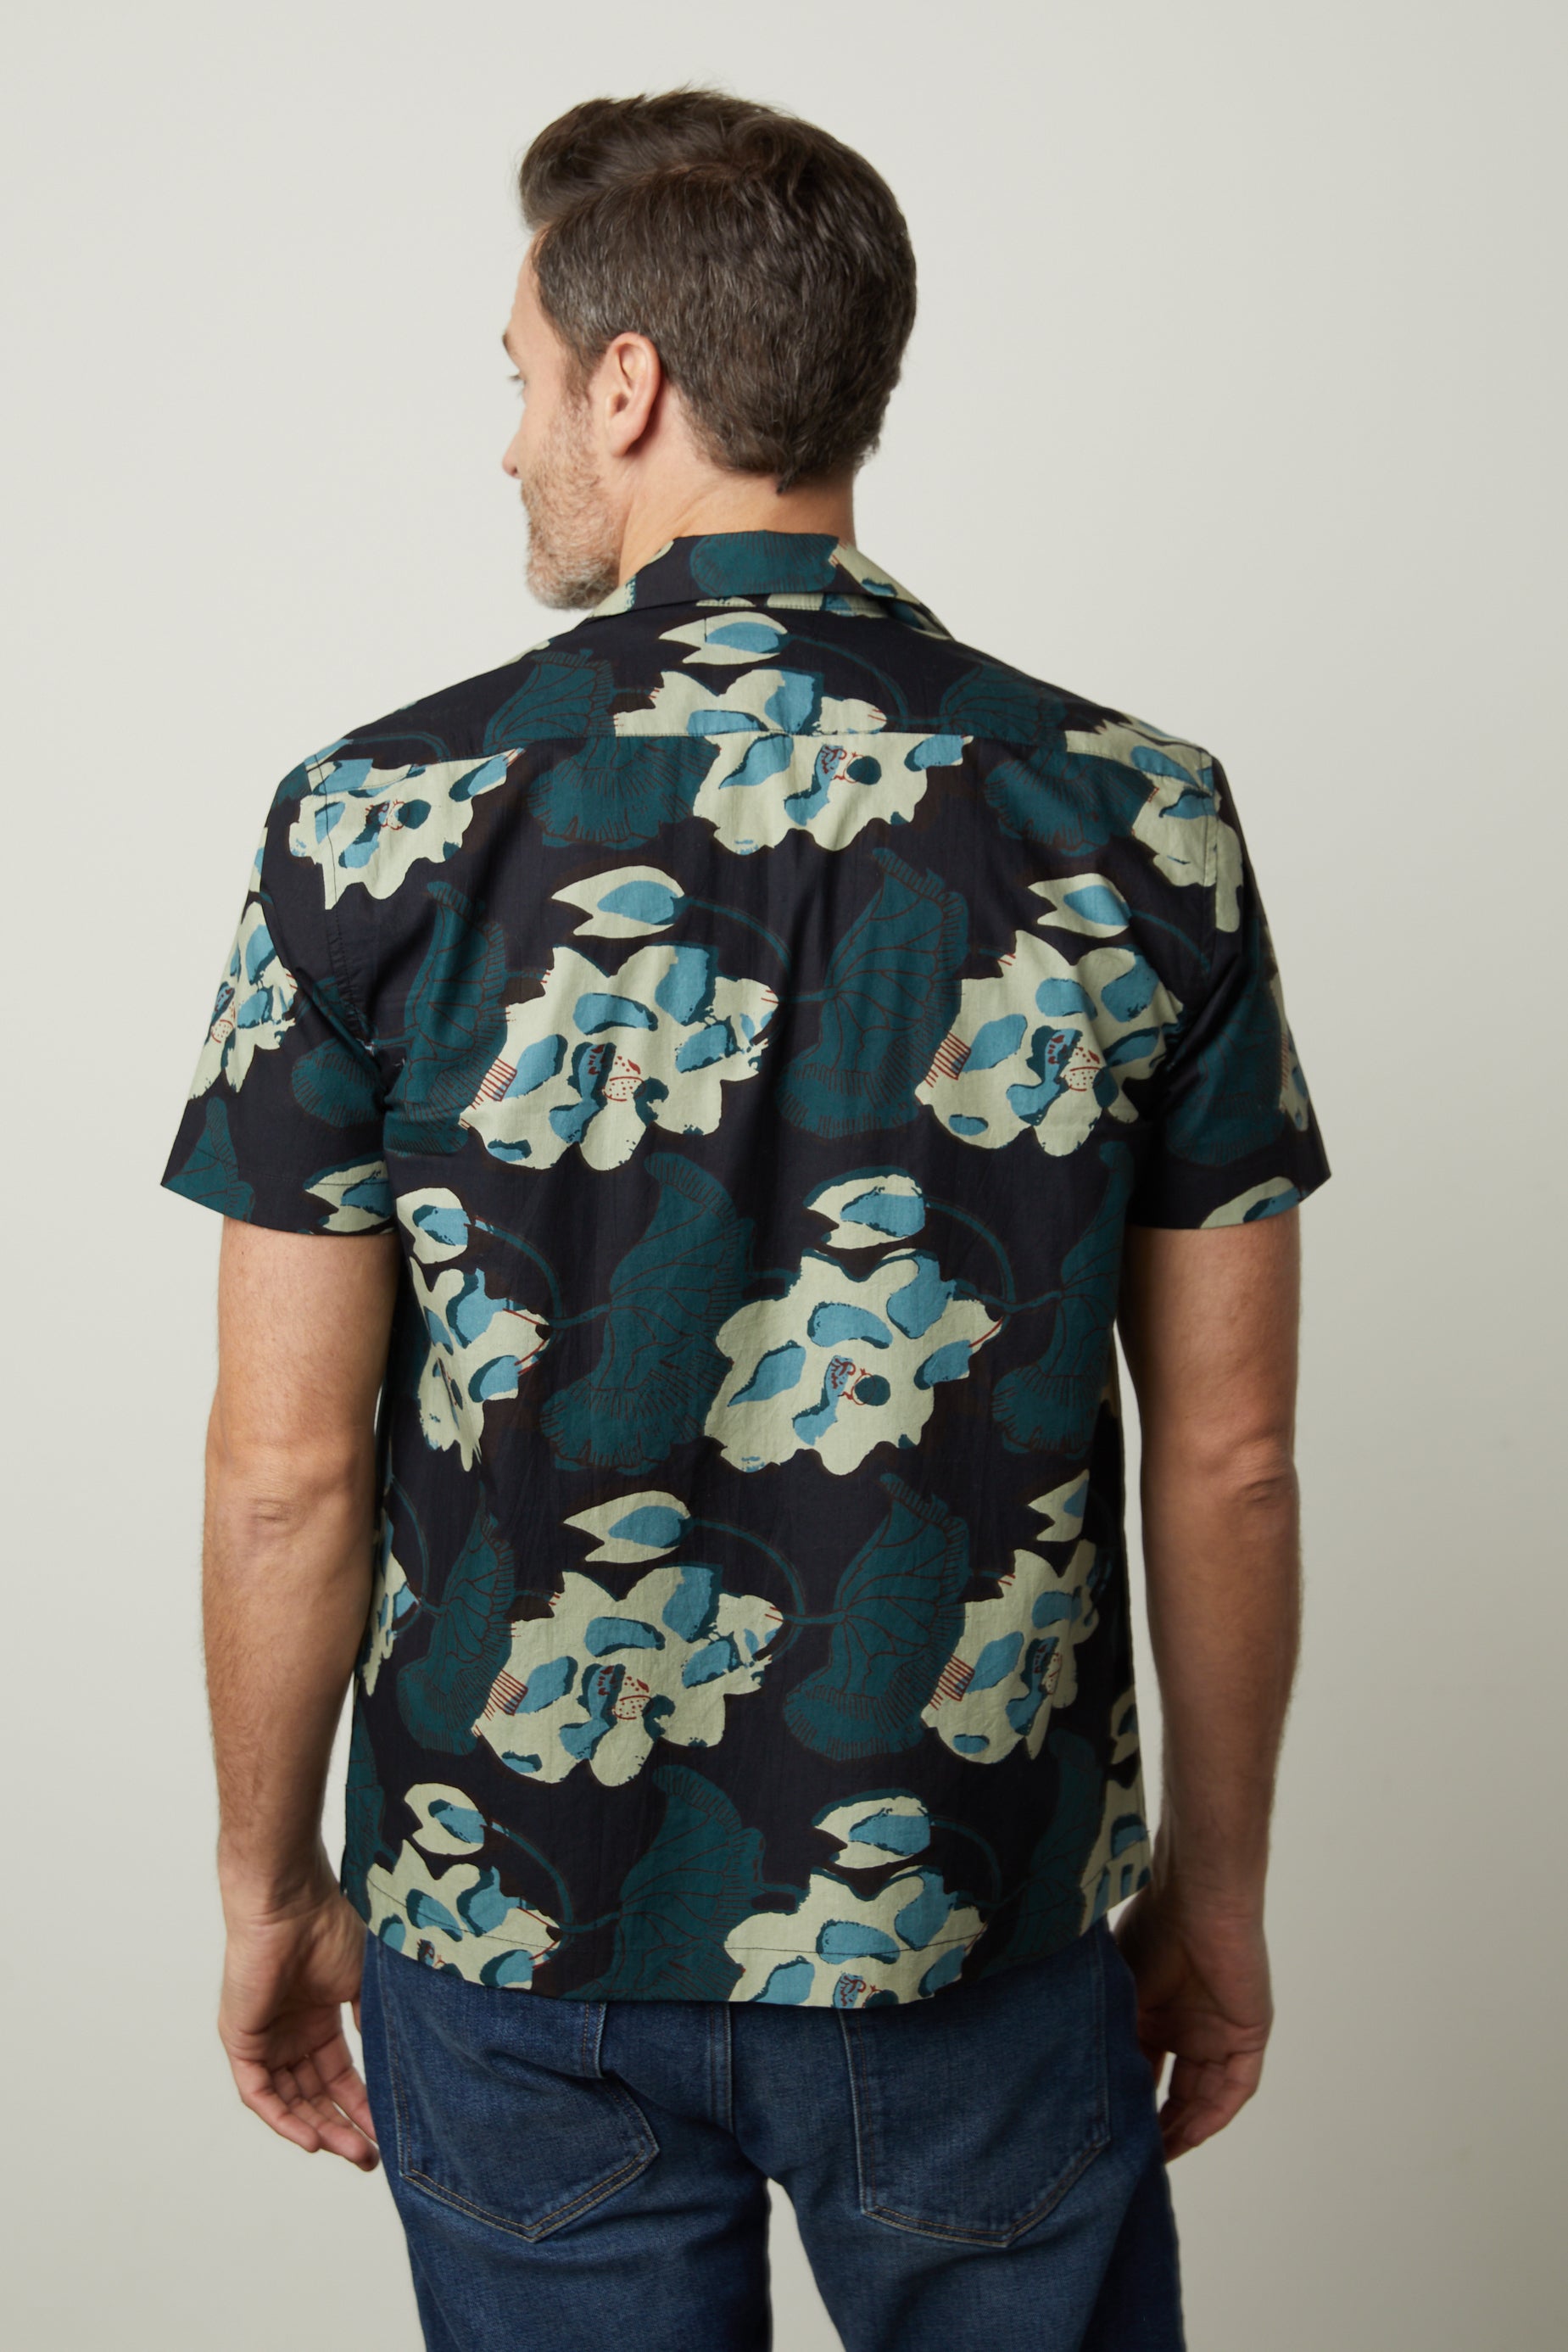   The back view of a man wearing a Velvet by Graham & Spencer IGGY PRINTED BUTTON-UP SHIRT. 